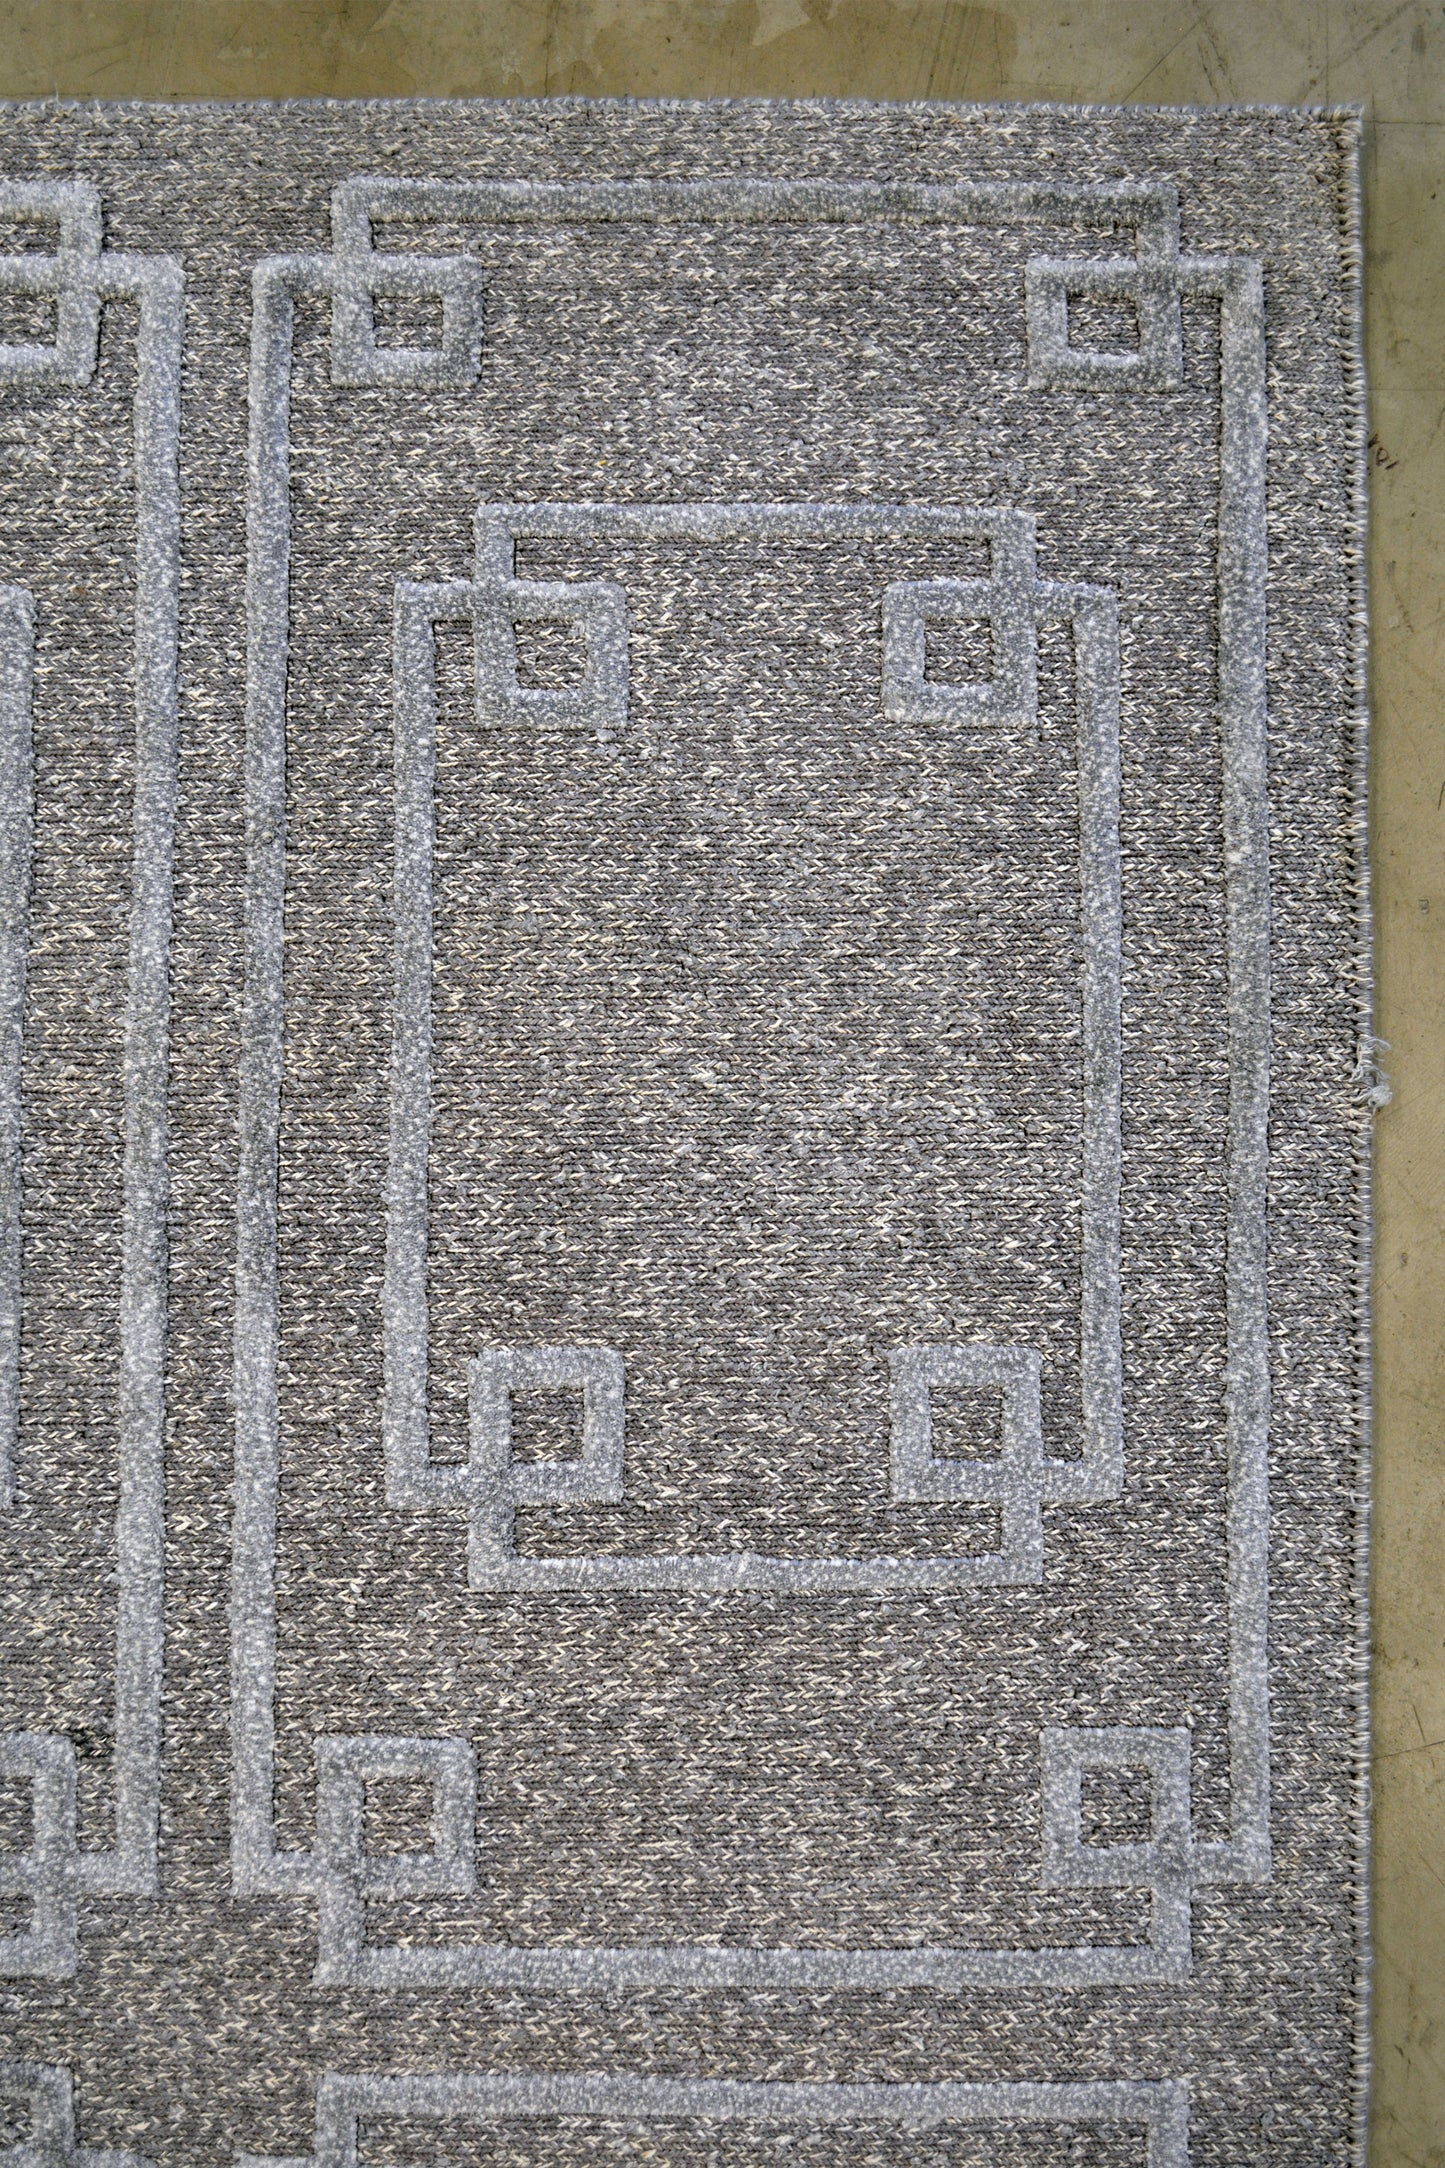  On the top right corner, there are no frames for this rug, but there is a thin border rendering the plain background.